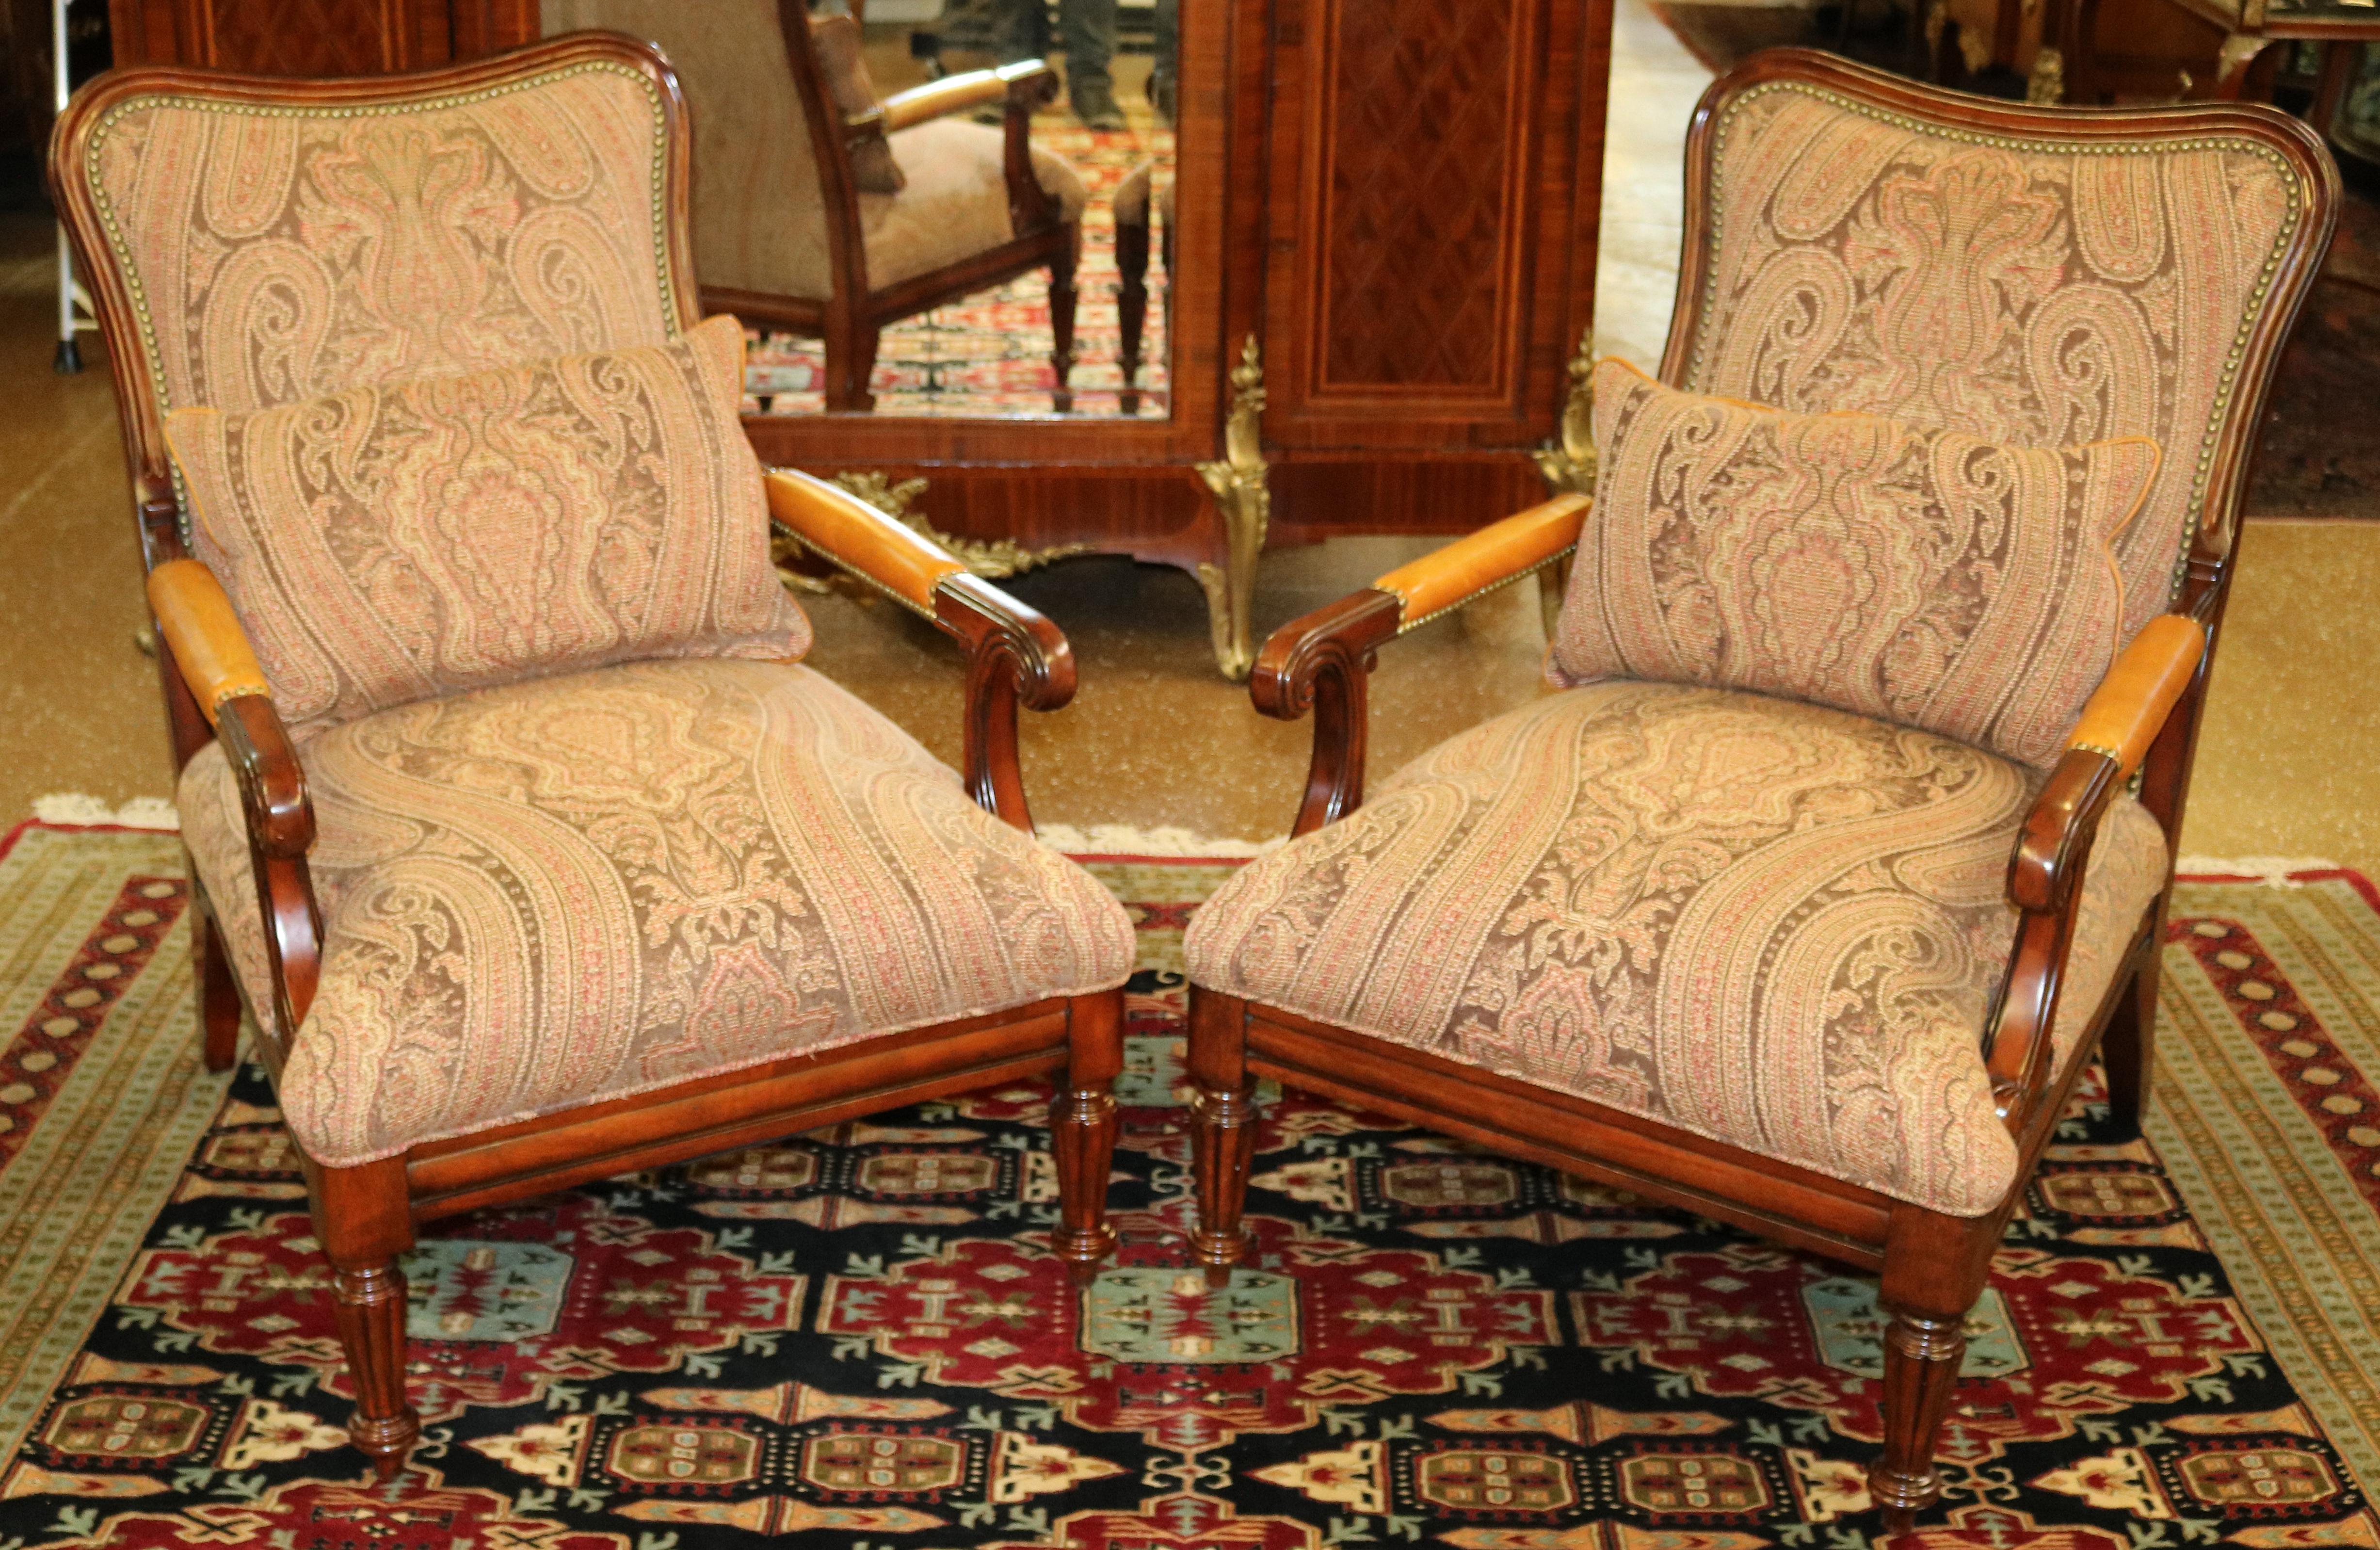 Lauren Ralph Lauren Regency Style Oversized Club Lounge Chairs Pair
Measures
38 inches H x 28 inches W x 29 1/4 inches x D 18 1/5 inches SH 